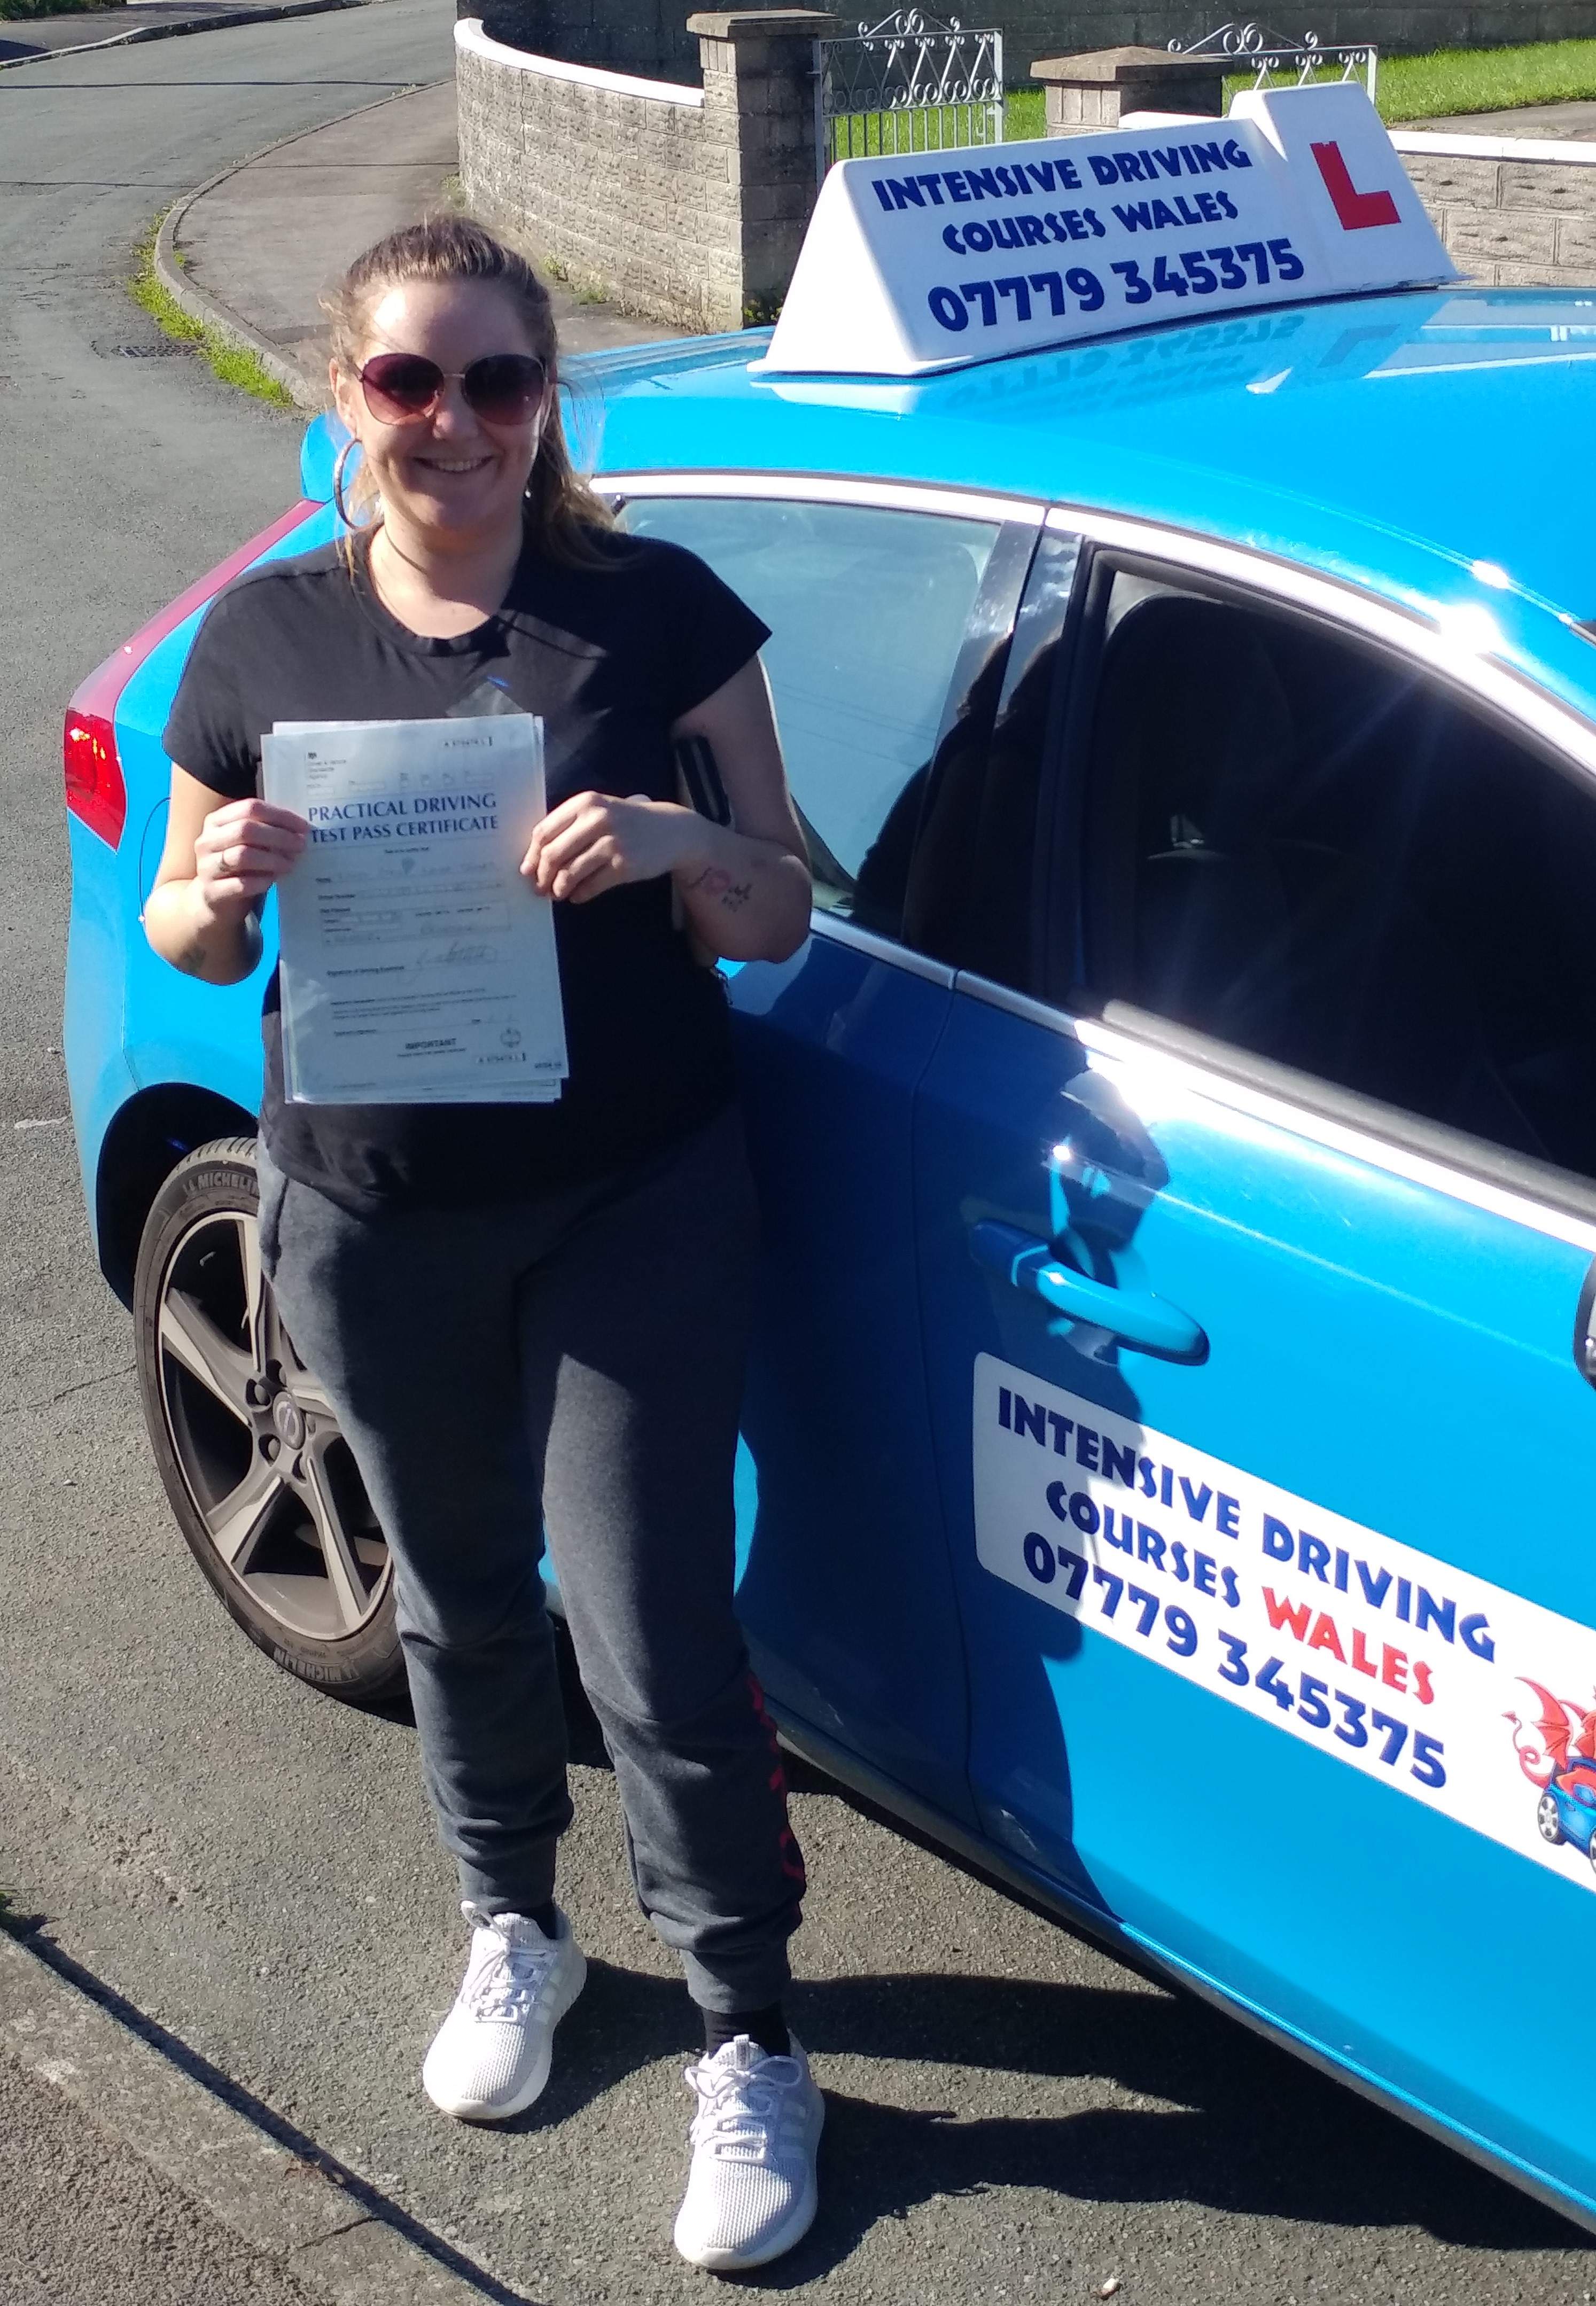 Pass your driving test in one week with an intensive driving course in bridgend